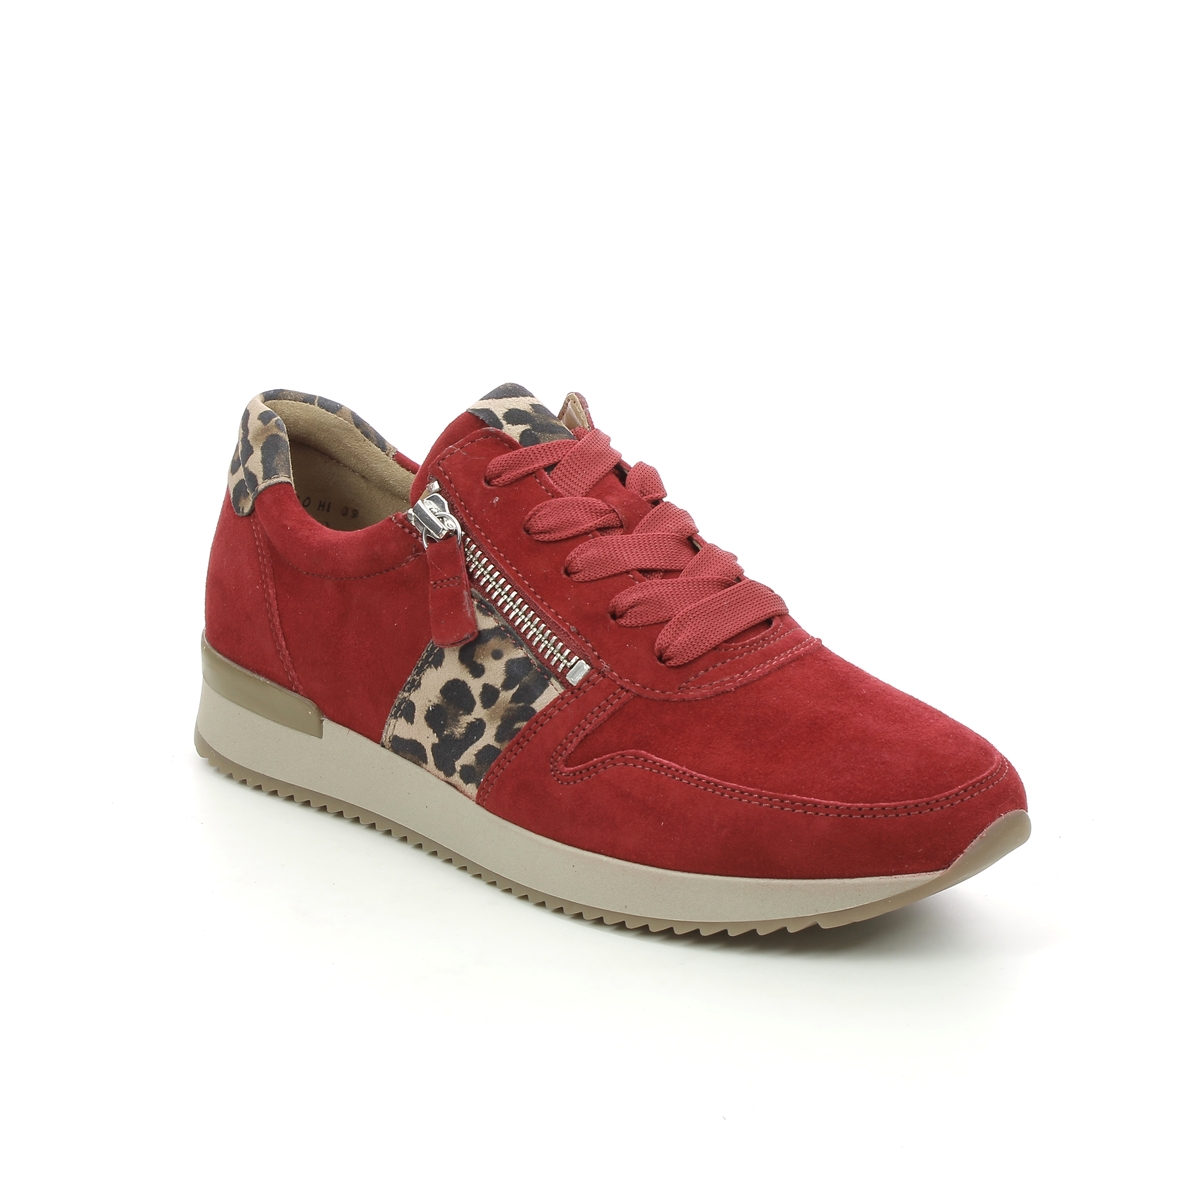 Gabor Lulea Red suede Womens trainers 73.420.15 in a Plain Leather in Size 7